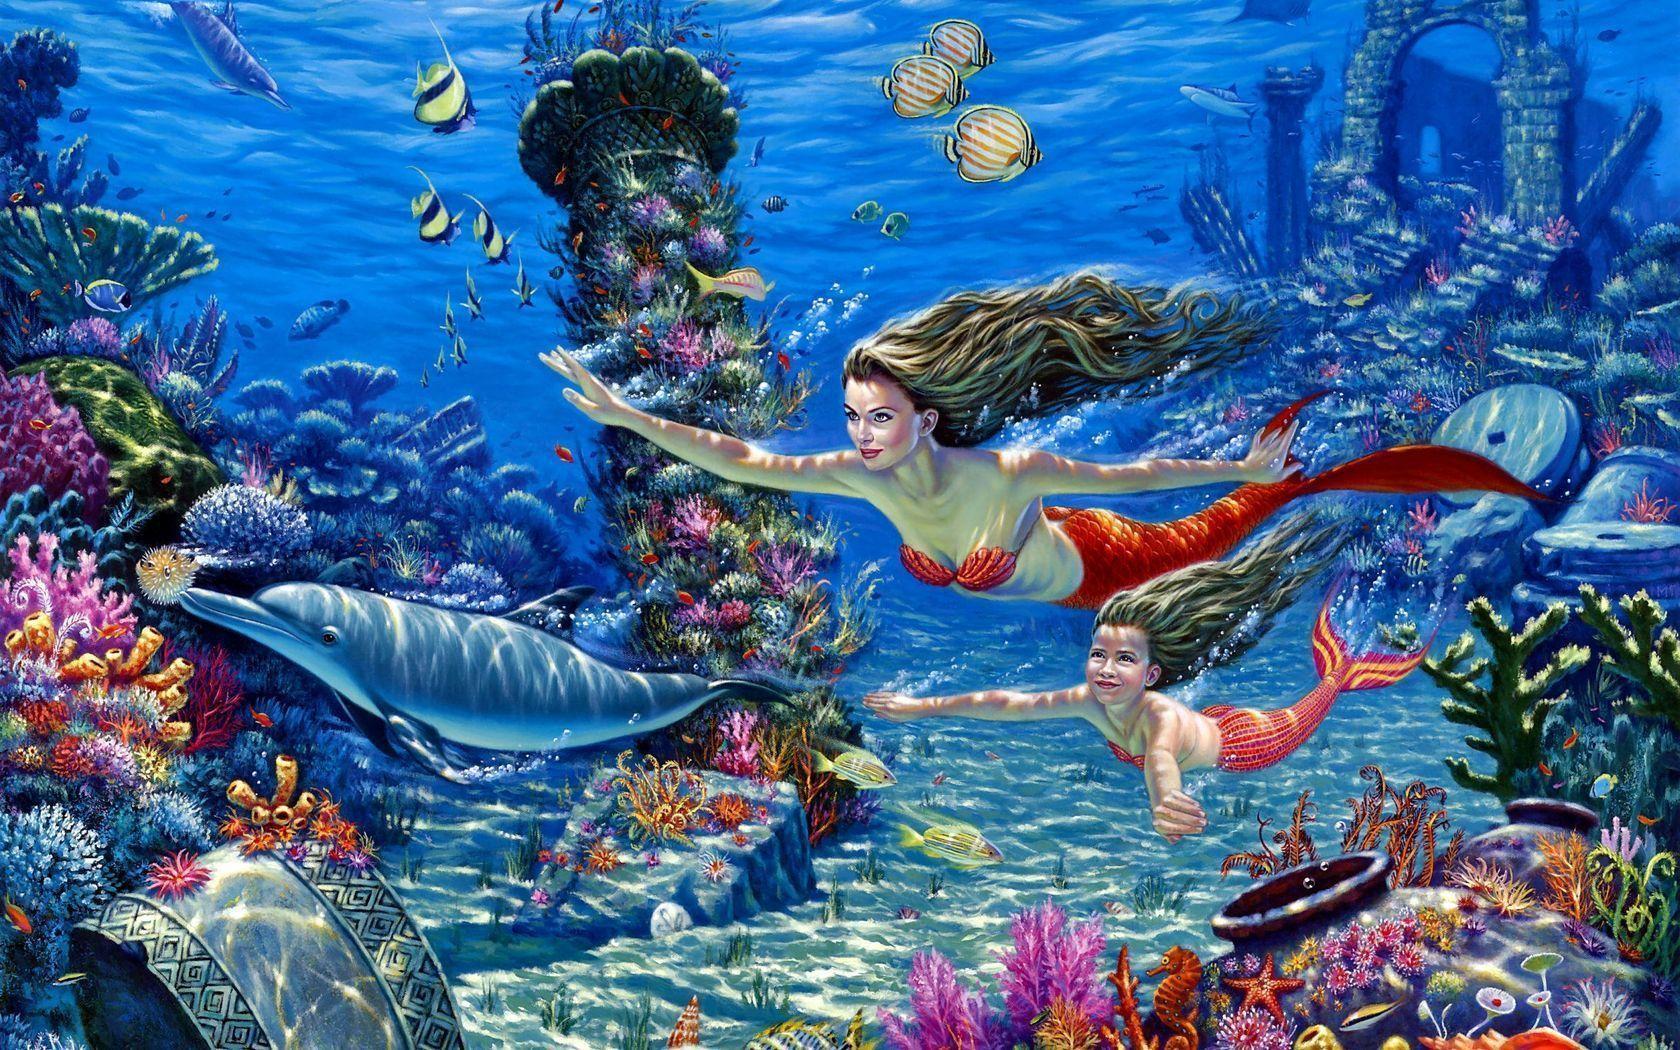 Check this out! our new Mermaid wallpaper